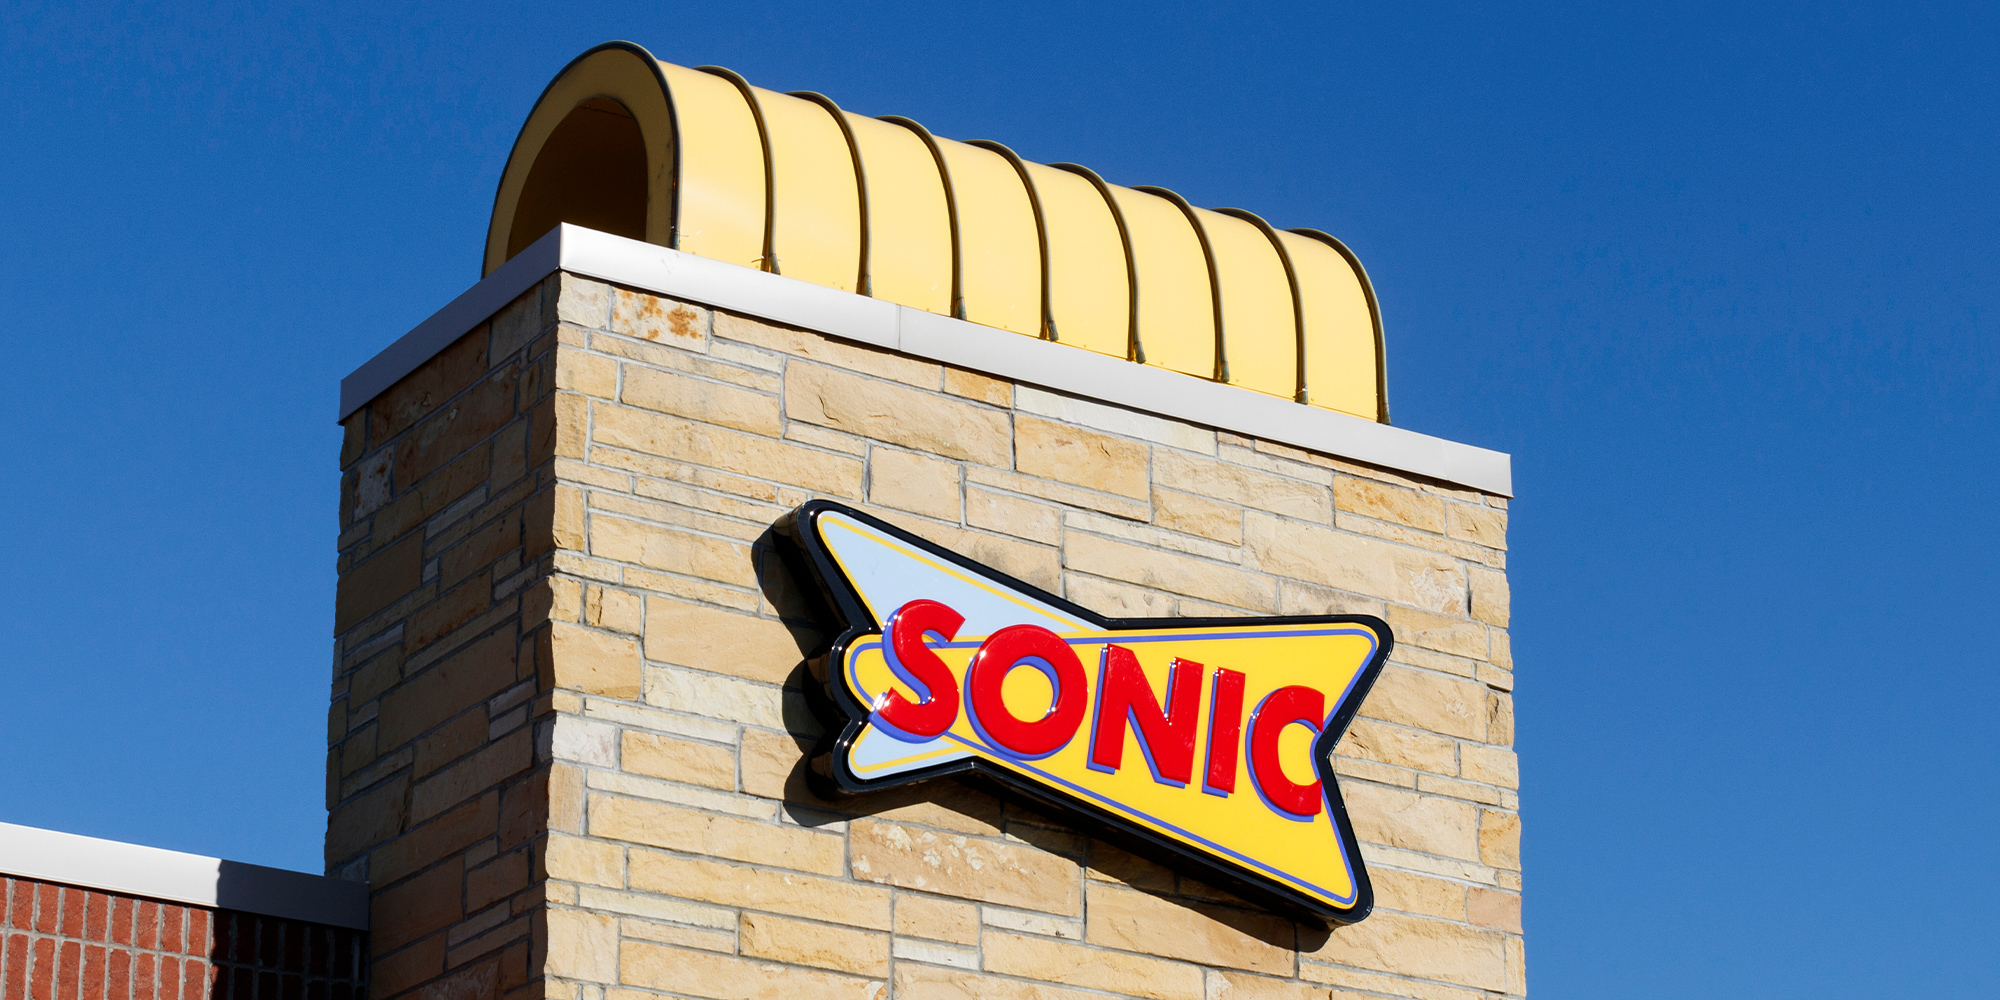 th?q=2023 Sonic food locations location For 